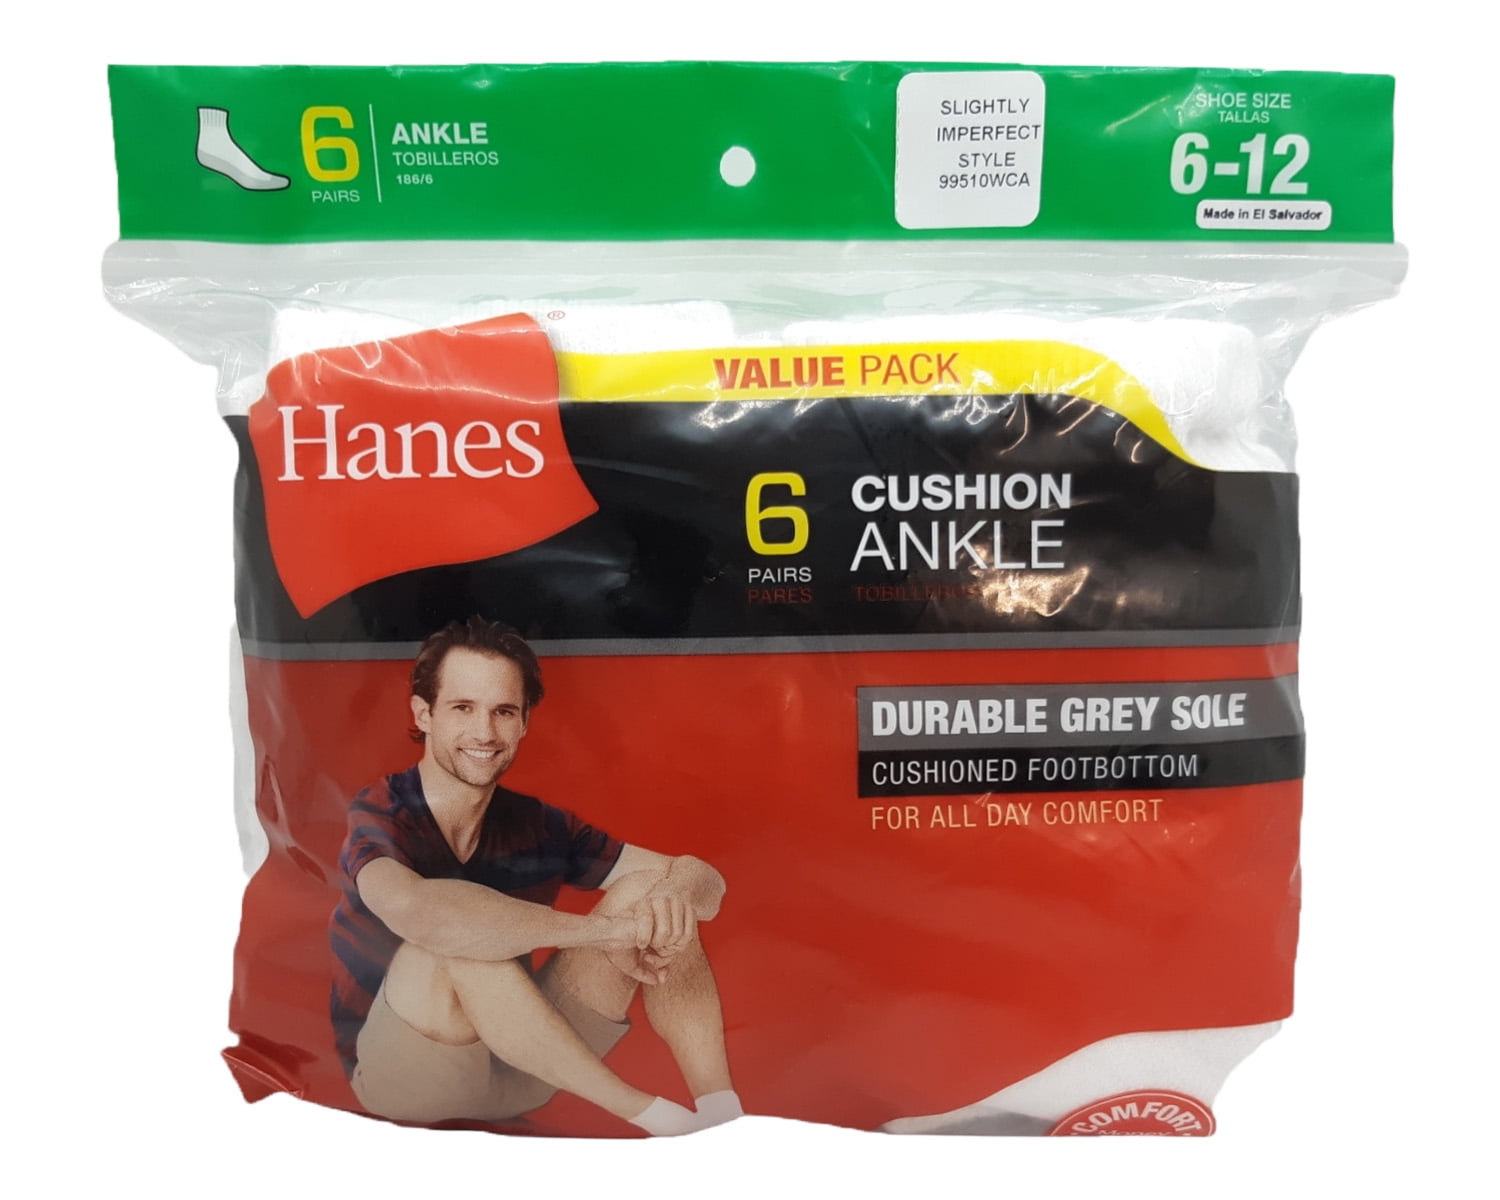 Hanes Cushion White Ankle Socks *SLIGHTLY IMPERFECT*, 6 Pairs, 6-12 ...